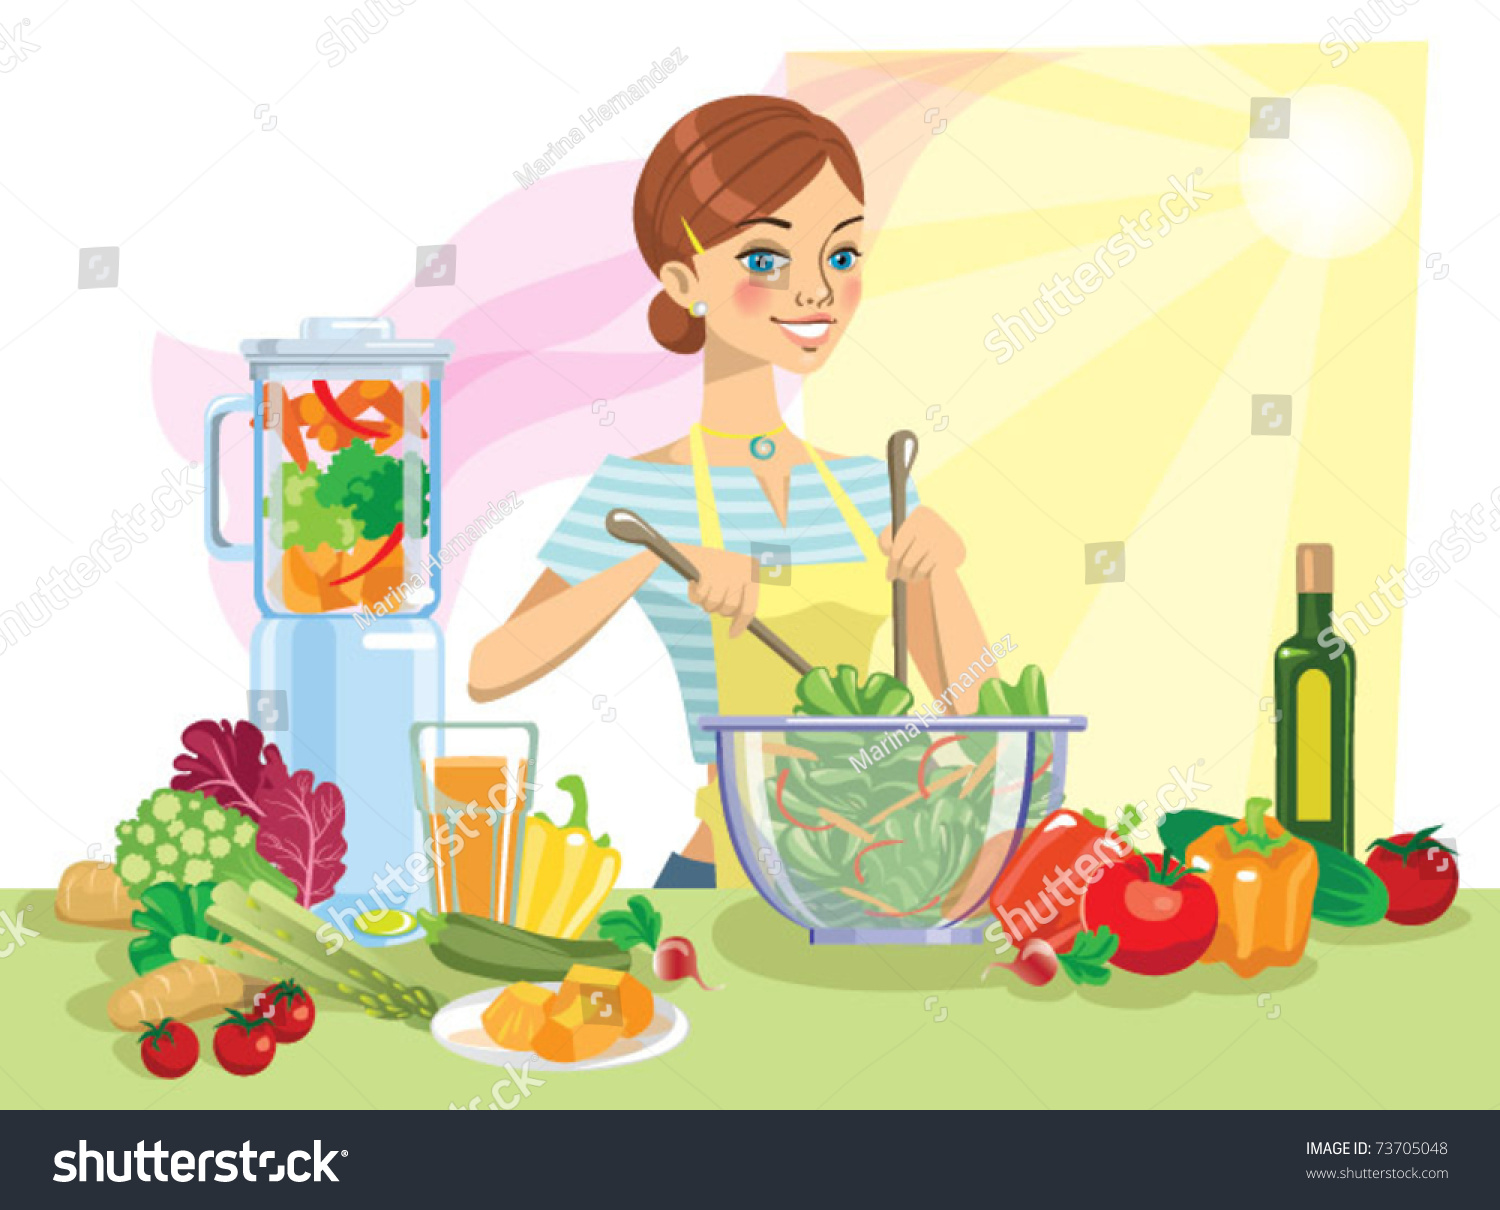 clipart of girl cooking - photo #44